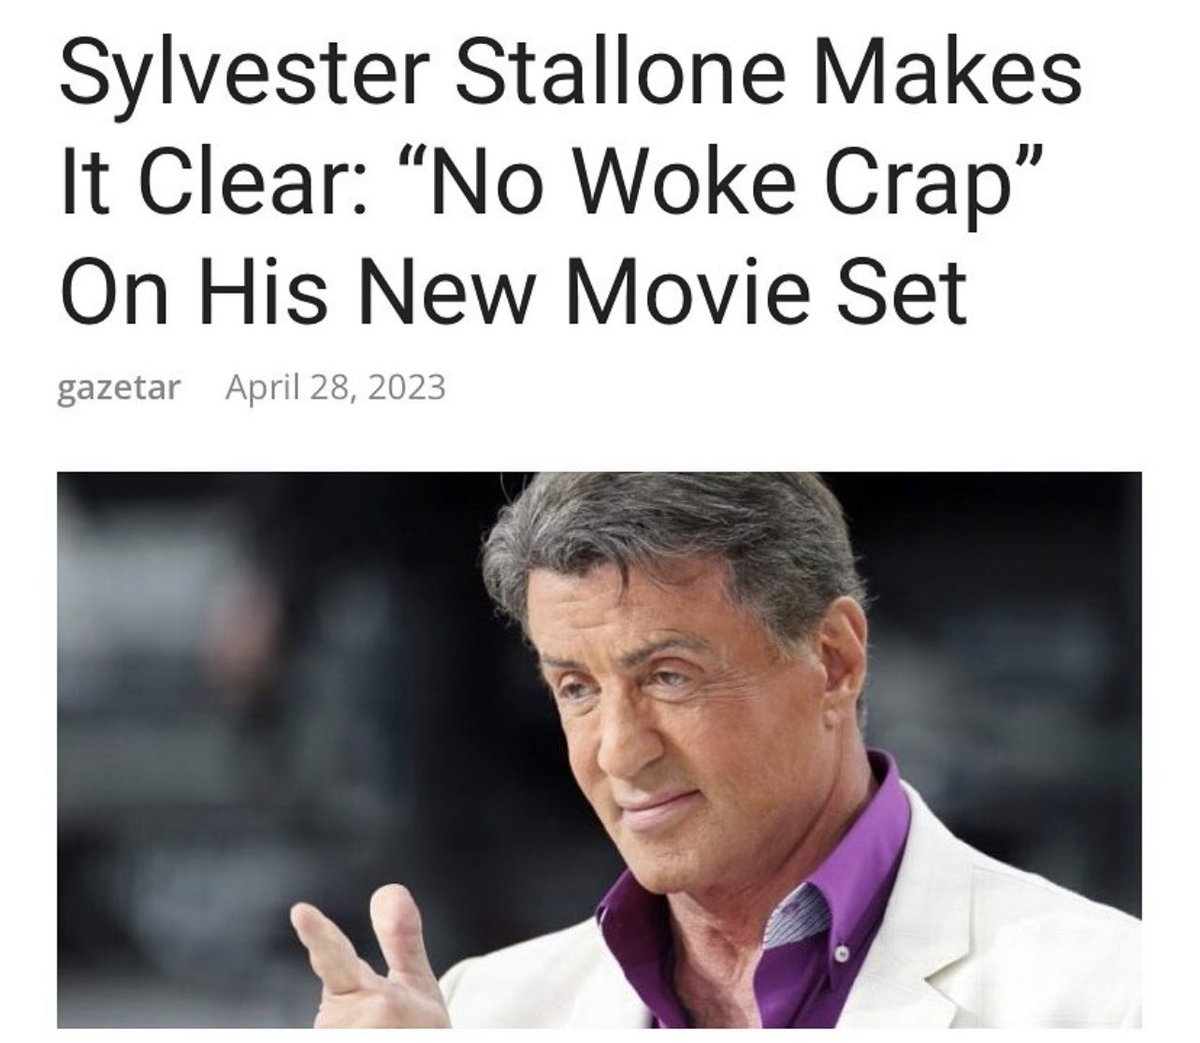 Amazing 🎯👉🏻@TheSlyStallone Sylvester Stallone Makes It Clear 'No Woke Crap 'On His New Movie Set🎯🇺🇸Well Done Sly 💪🏻🇺🇸🙏God Bless You & Your Family✝️🙏